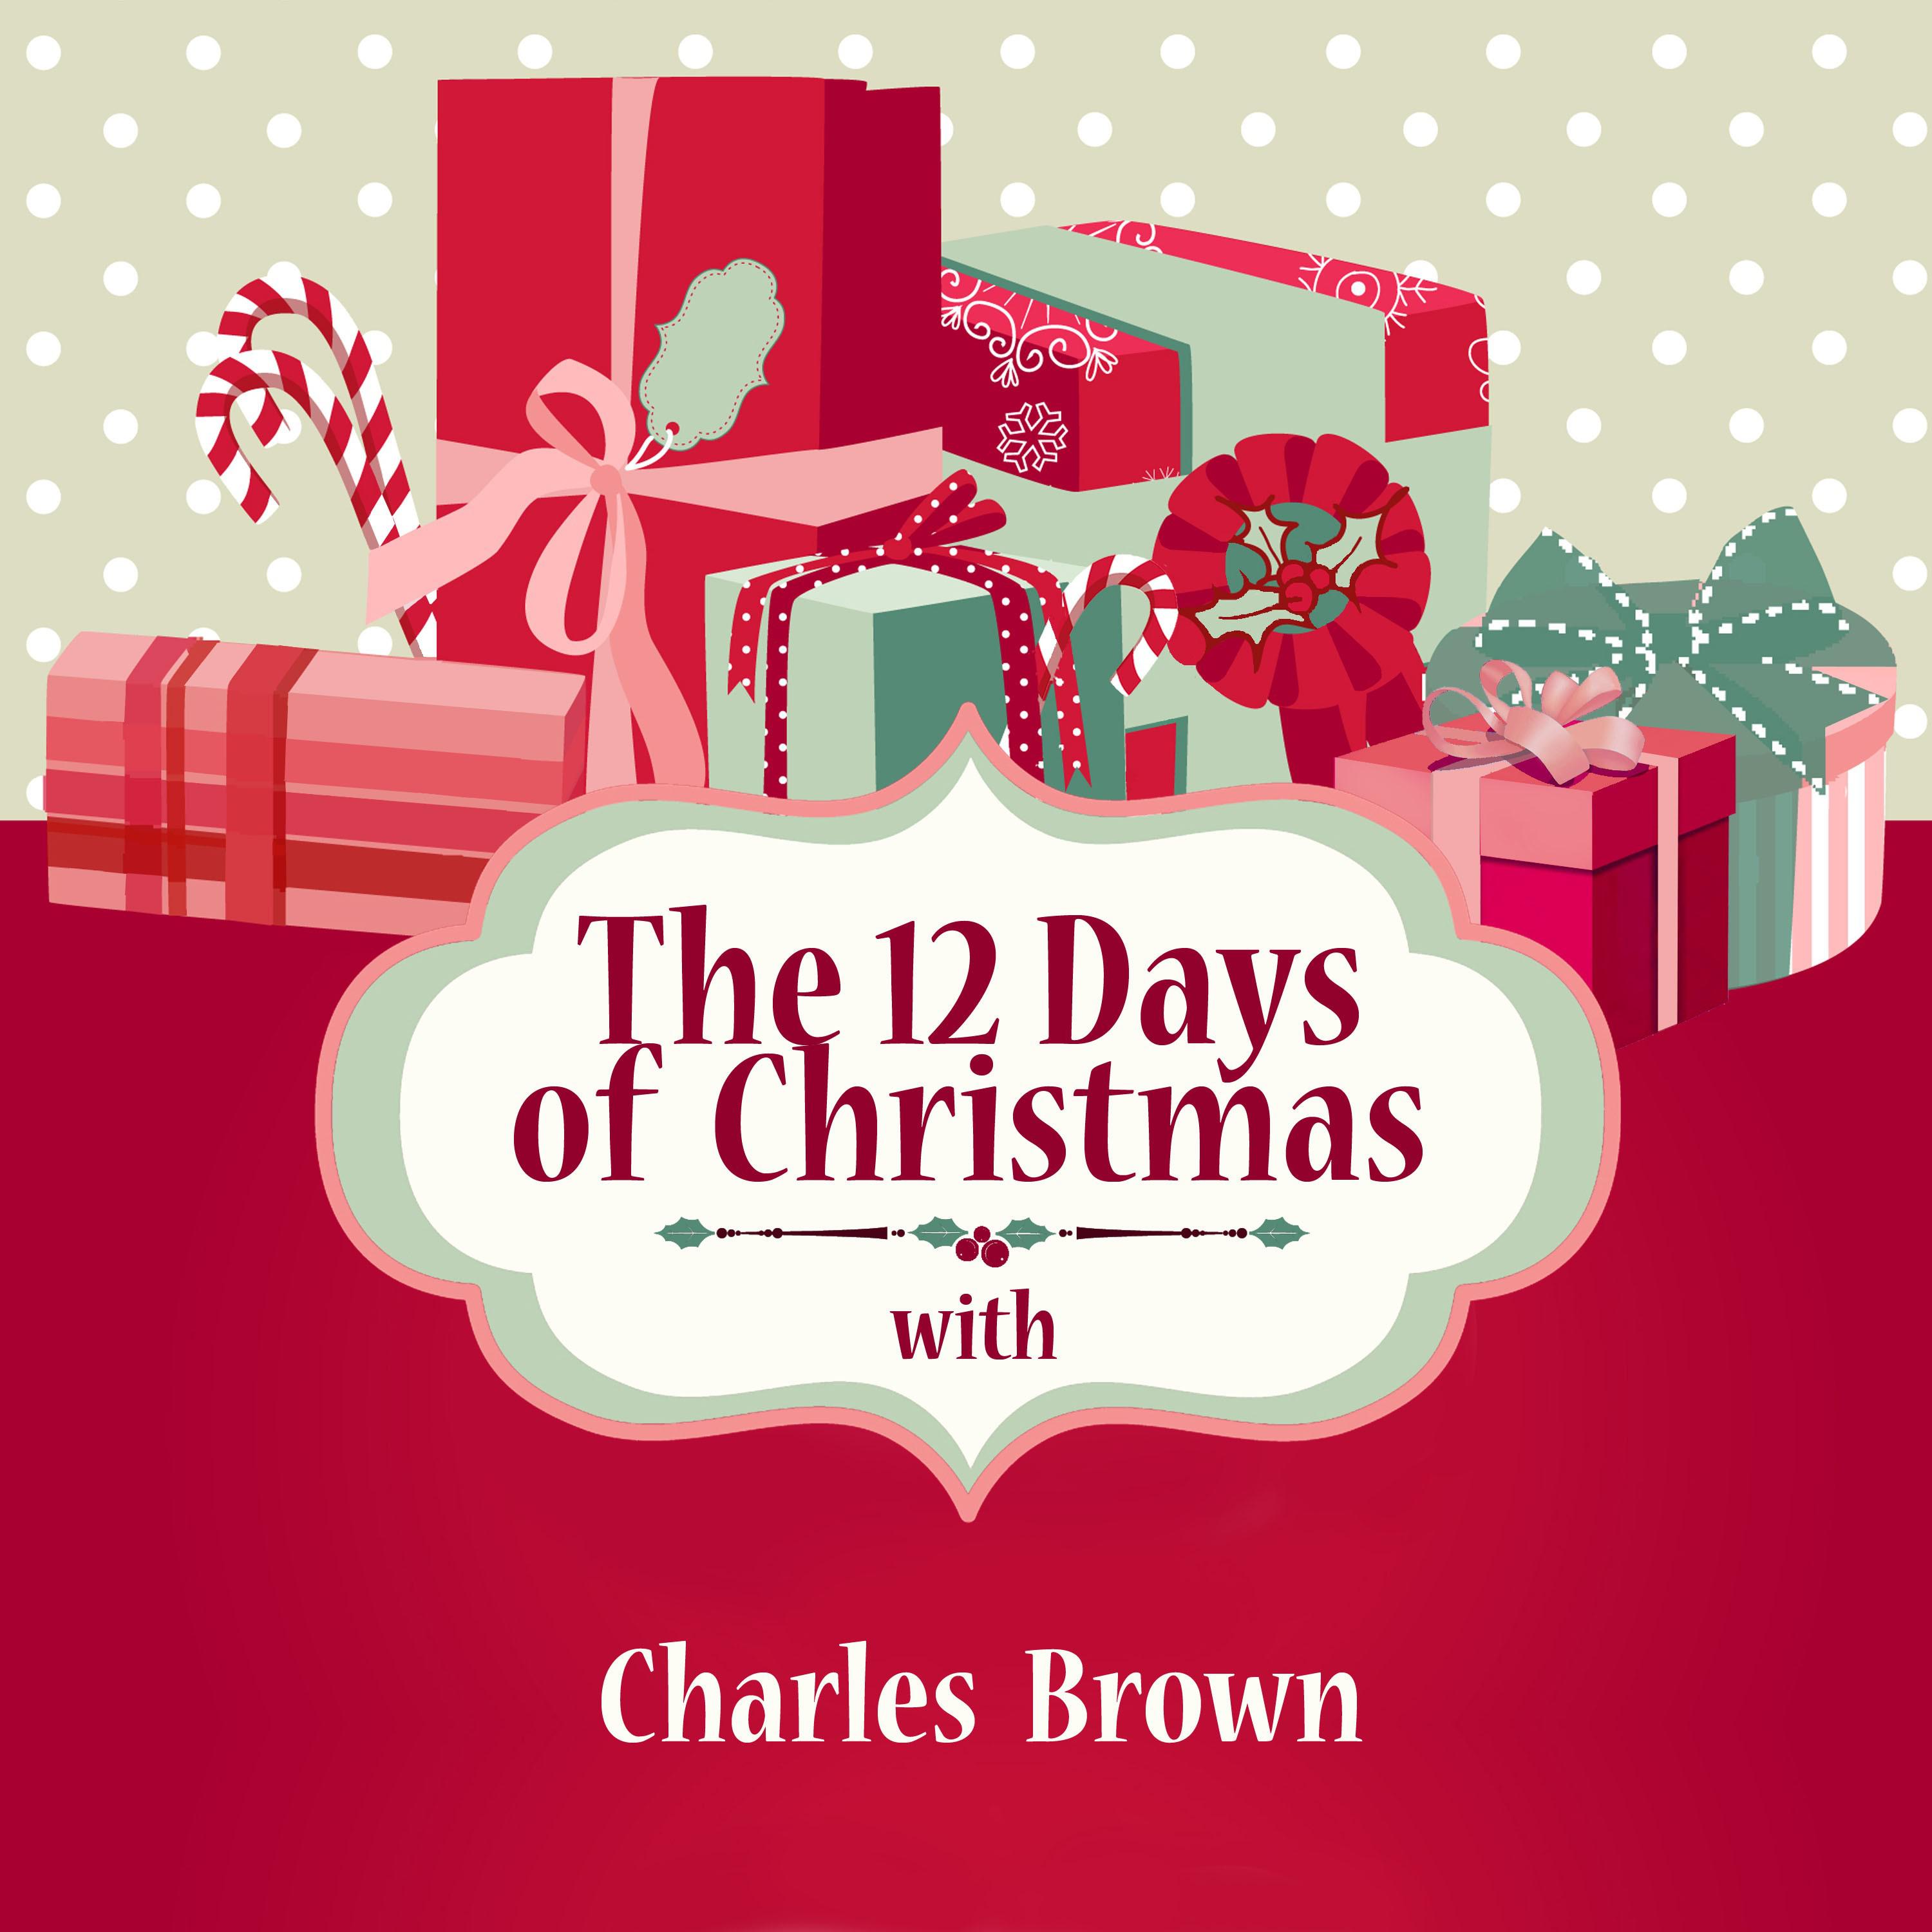 The 12 Days of Christmas with Charles Brown